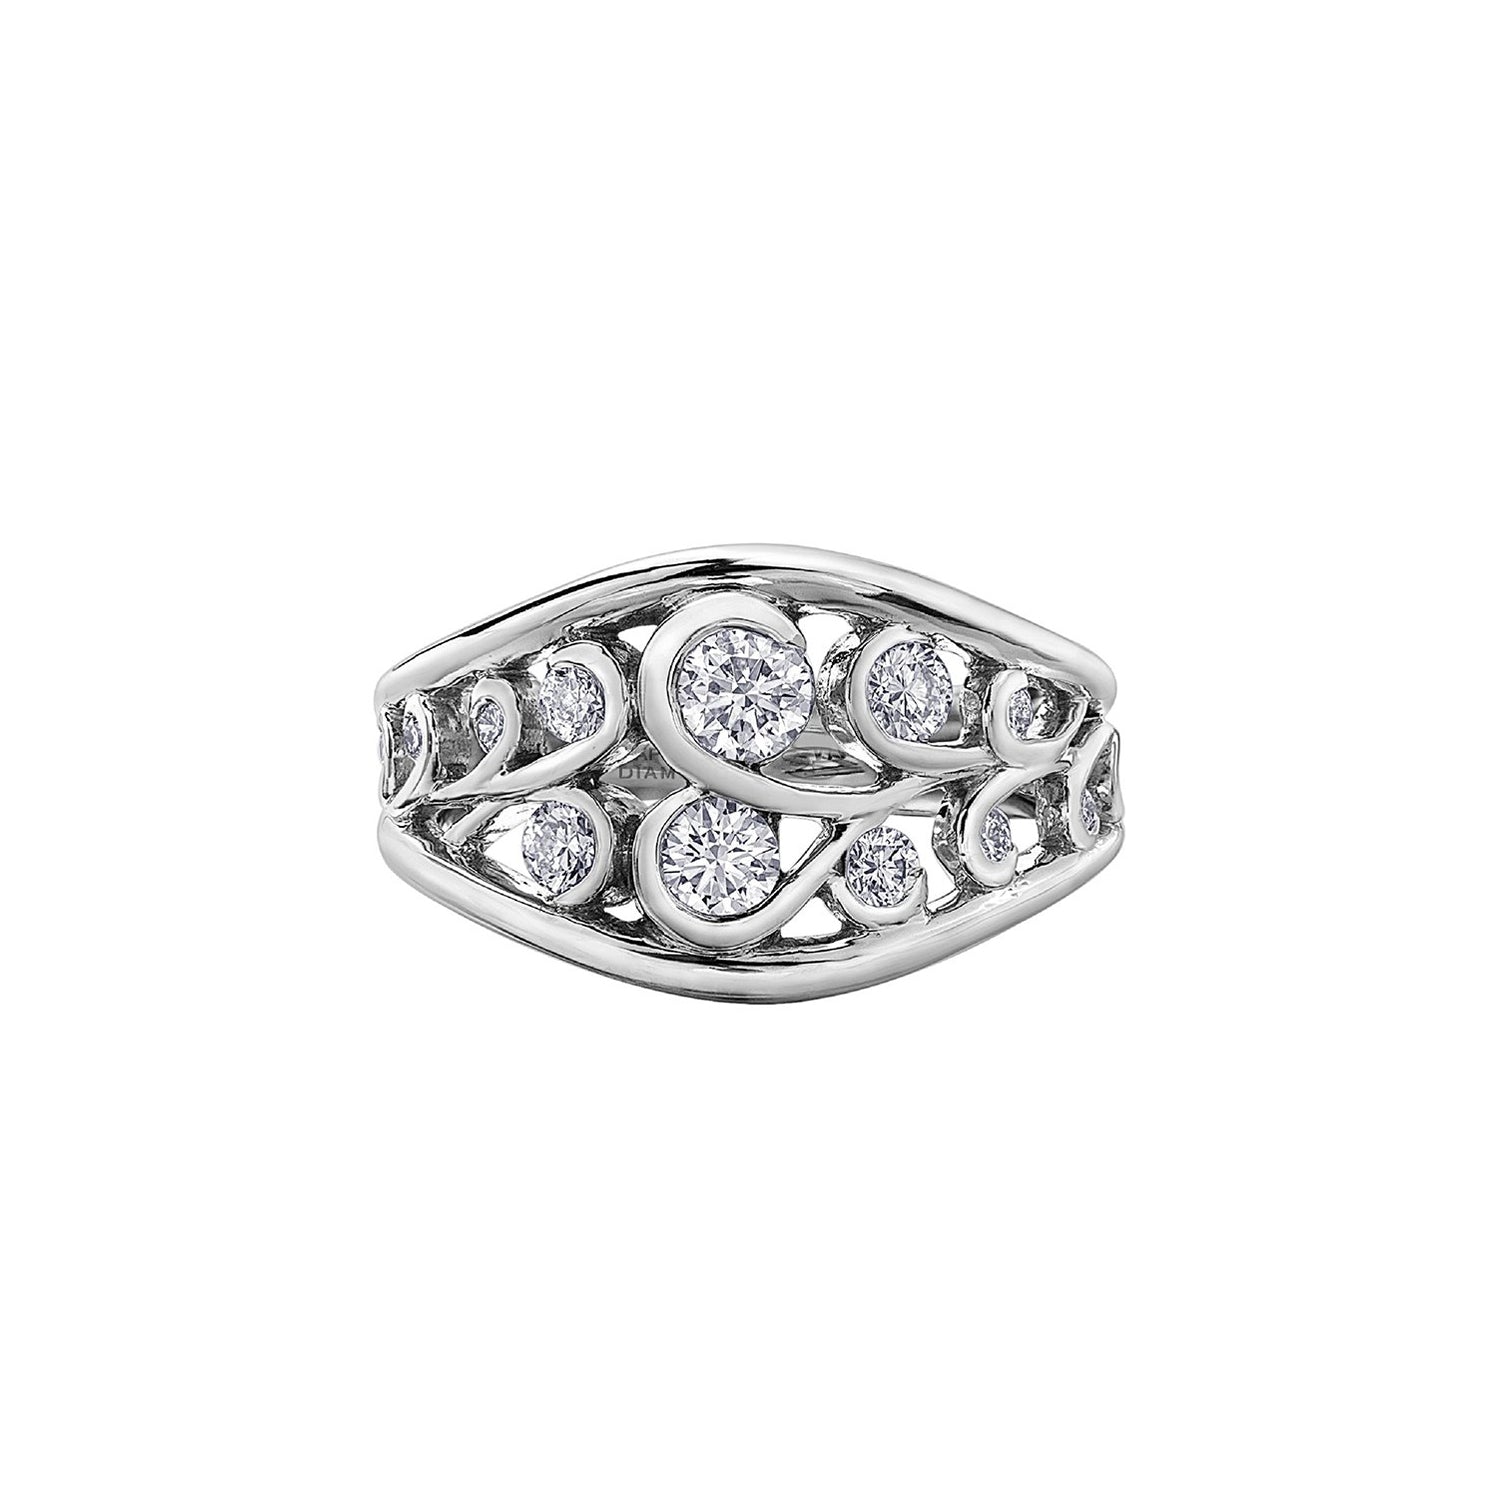 Crafted in 14KT white Certified Canadian Gold, this ring features swirl patterns set with round brilliant-cut Canadian diamonds. 